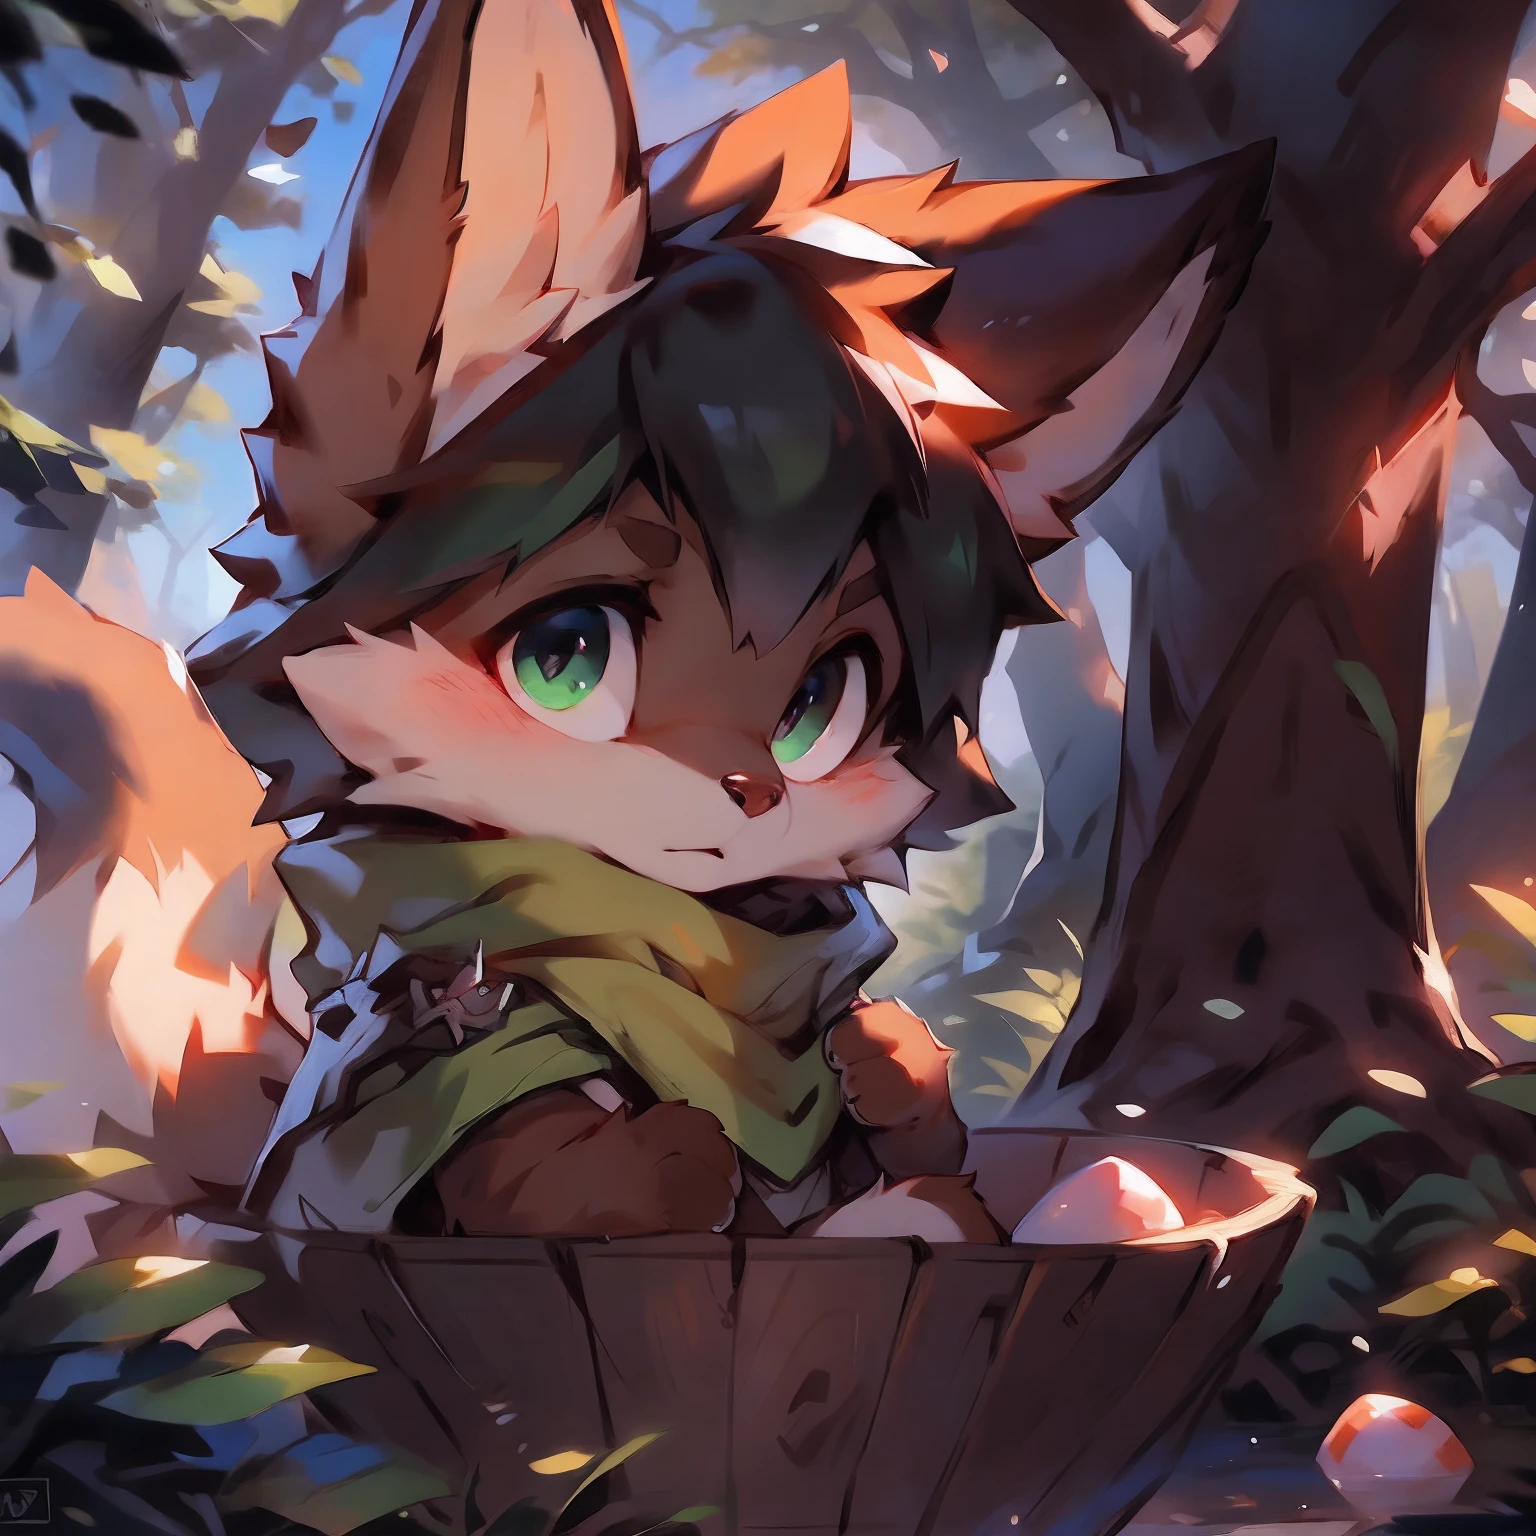 A curious male fox cub pokes its head out of a cozy fox den in the forest. He has orange fur, bushy tail, And cheer up the big fluffy ears. He wears the green adventurer's hat and scarf. His eyes were bright and surprised as he looked out of the study in the lush woods。, with a sunbeam coming through the trees. Small birds fly nearby，And in the distance there was a deer passing by. The fox cub was excited, Desire to express, Get ready to explore the outside world.
break
anthropology,Furry,feral,(Digital media \(artwork of a\):1.2),(hi，It's nothing,absurd res:1.2),Perfect anatomy,Anatomically correct,Detailed,Detailed face,Detailed eyes,(Realistic fur,Detailed fur:1.25),Detailed background,amazing background.
Break
(author：Puinki \(artist\):1.2),(author：Unreal Land,author：Sumi Kuroi,author：Milk Tiger 1145,author：Morkey,author：Emolga 1,Through the egg capsule:1.2),(author：Xia Huaiting:0.8),(by Pino Daeni:0.8),(by Hioshiru:0.8),(by Chunie:0.8).